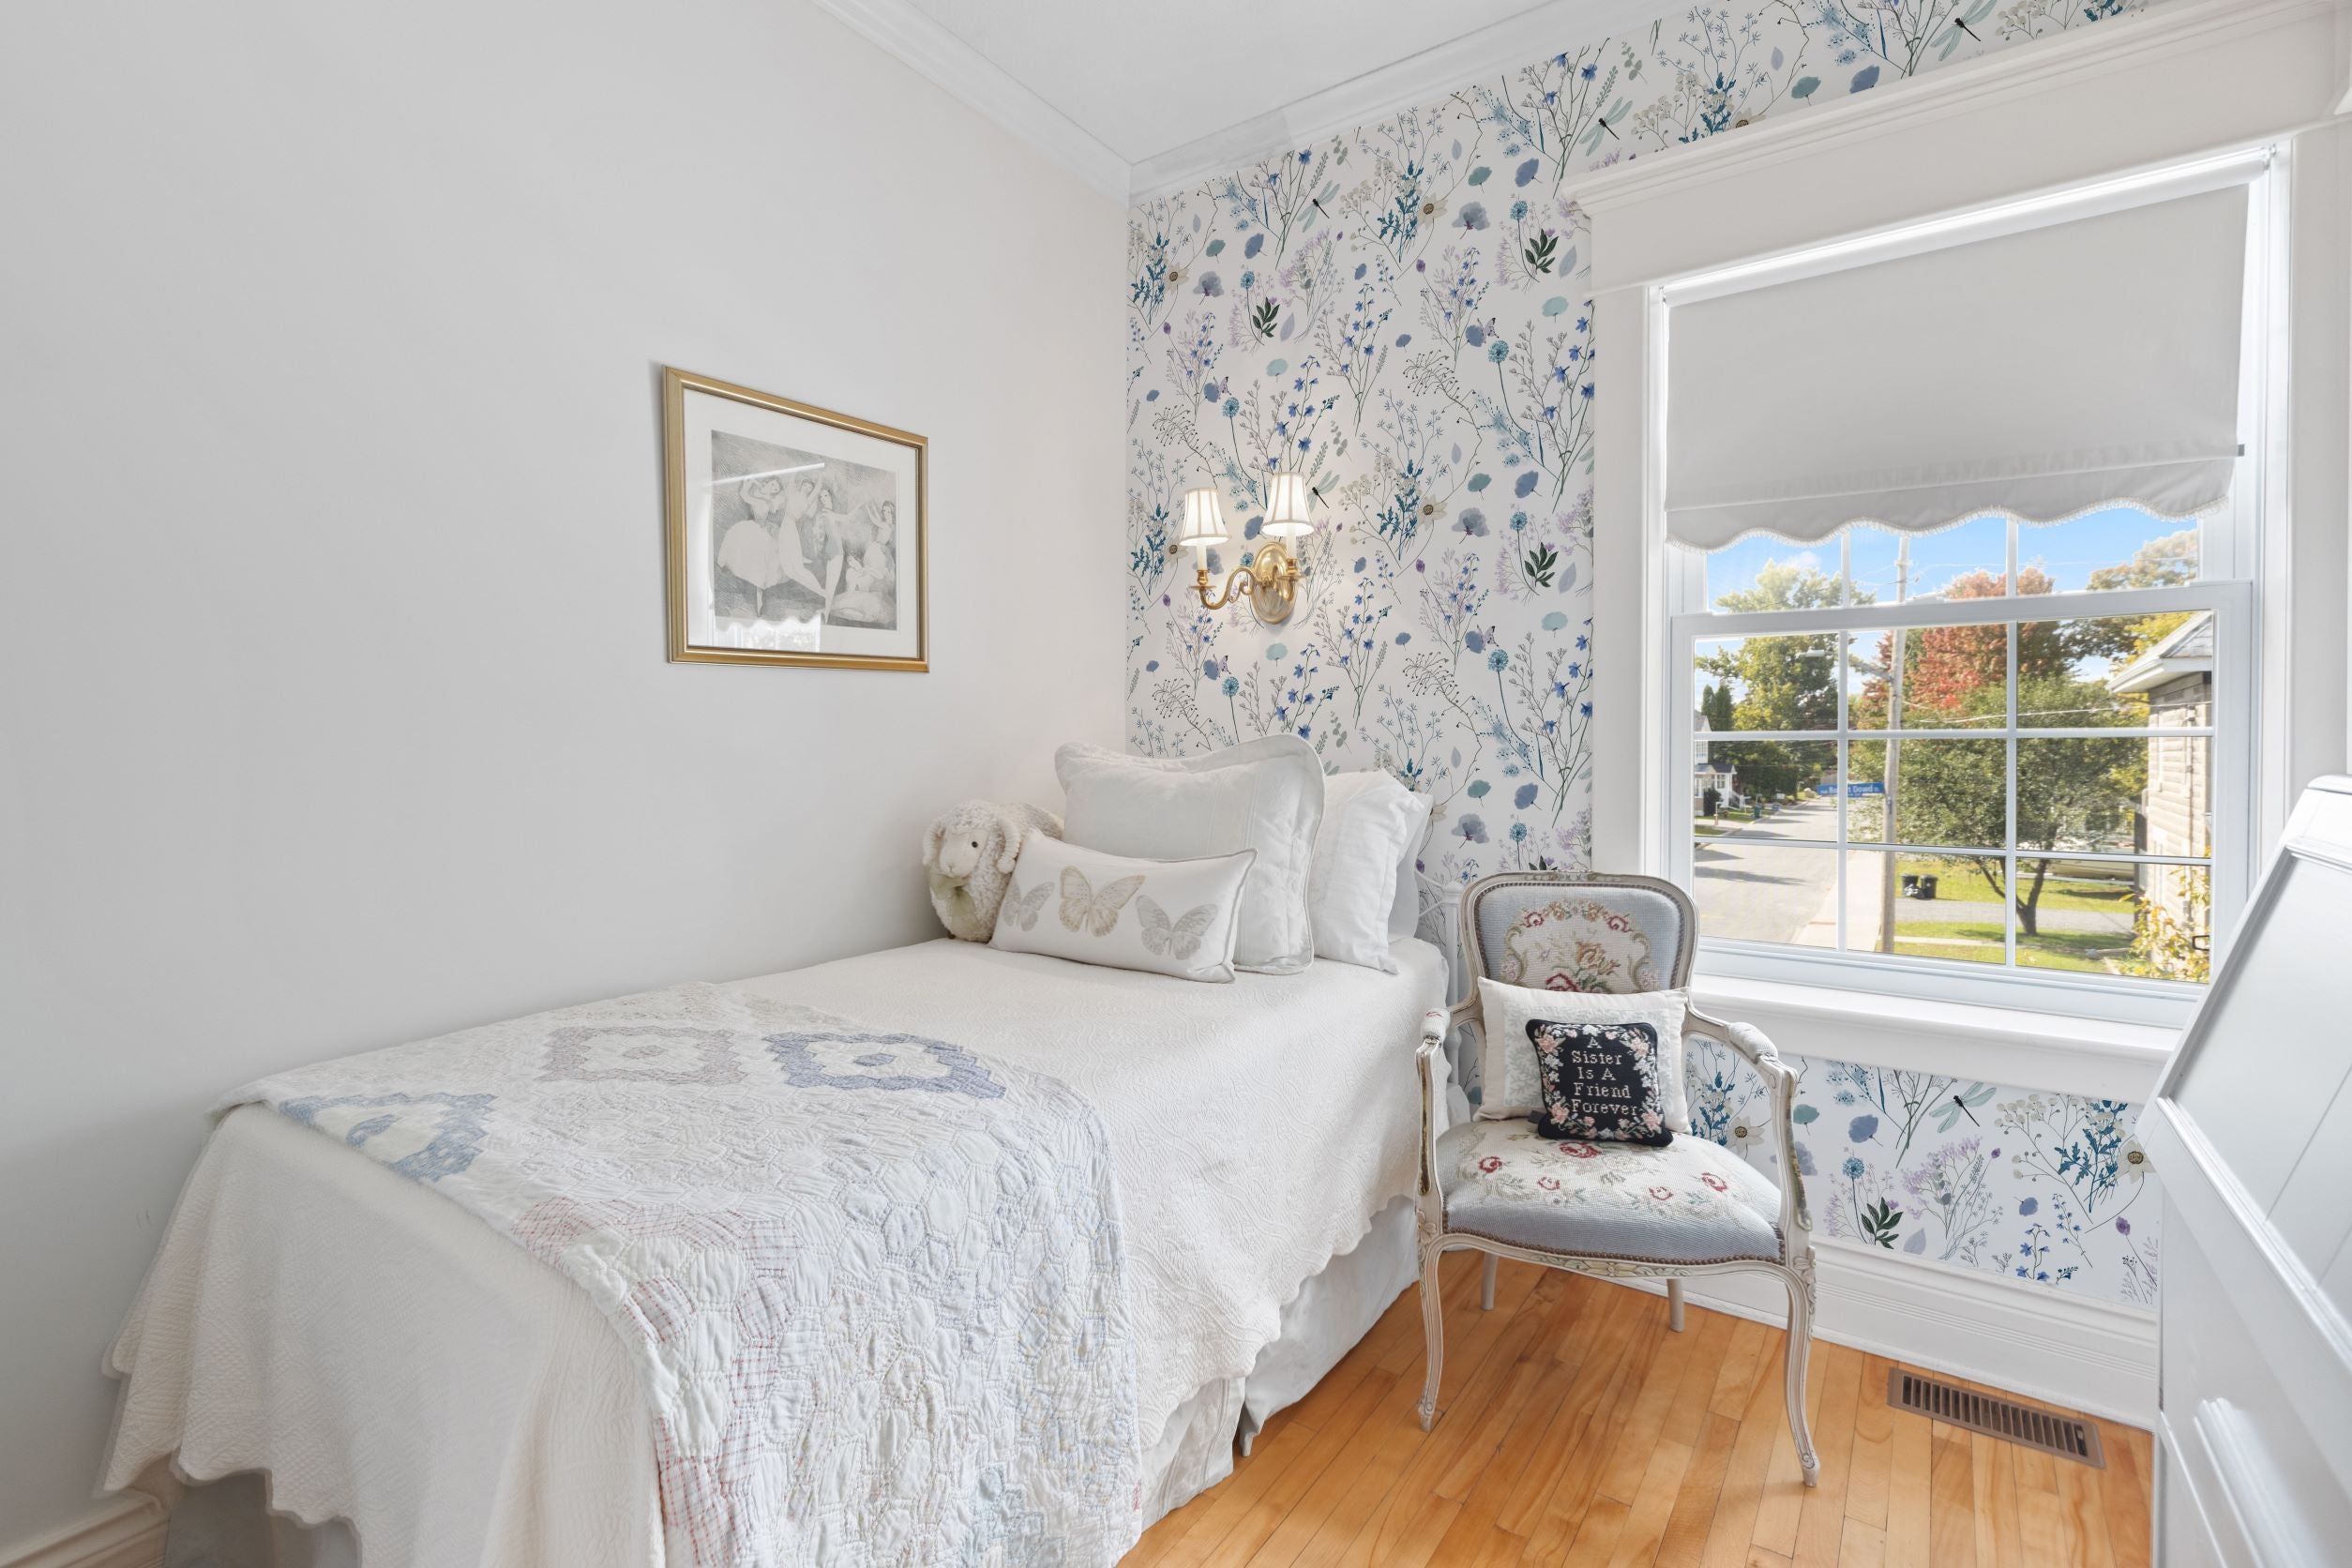 A charming vintage bedroom with natural light streaming through the window, showcasing the Aerie Floral II Wallpaper with delicate blue and purple flowers and soft greenery, complementing a classic white bedspread and antique-style armchair.